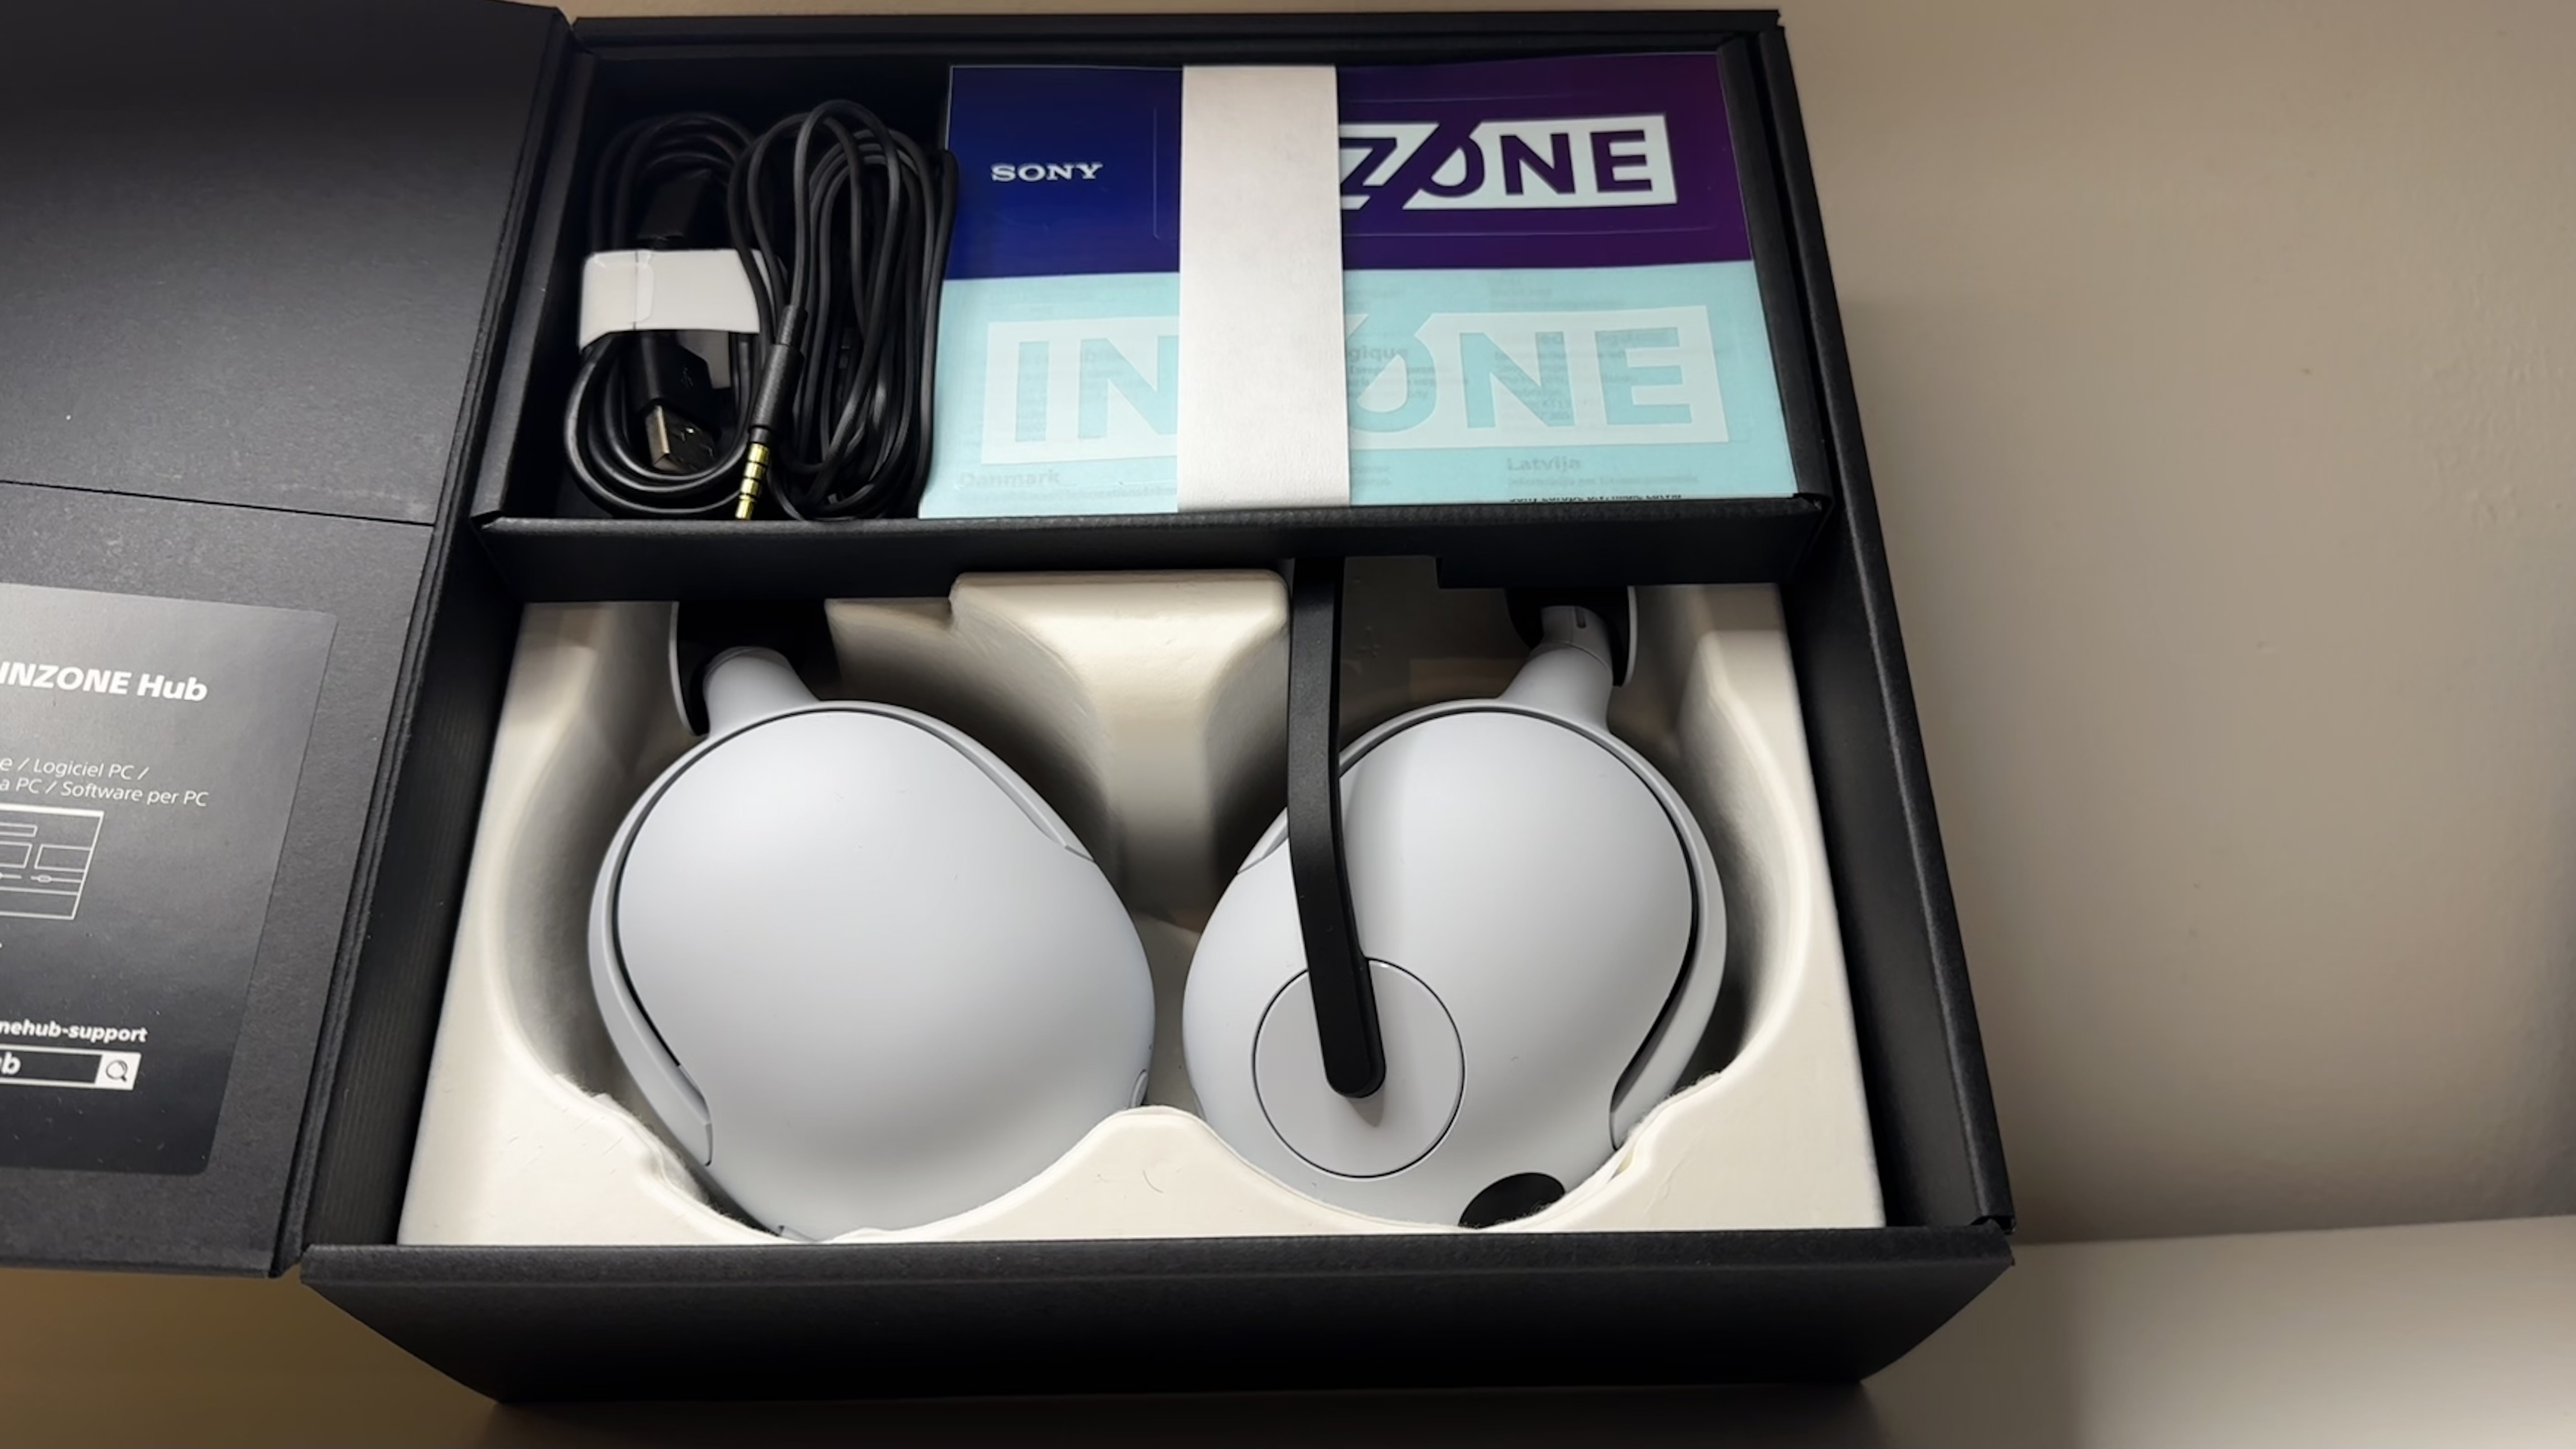 Sony InZone H5 gaming headset on a desk with packaging.